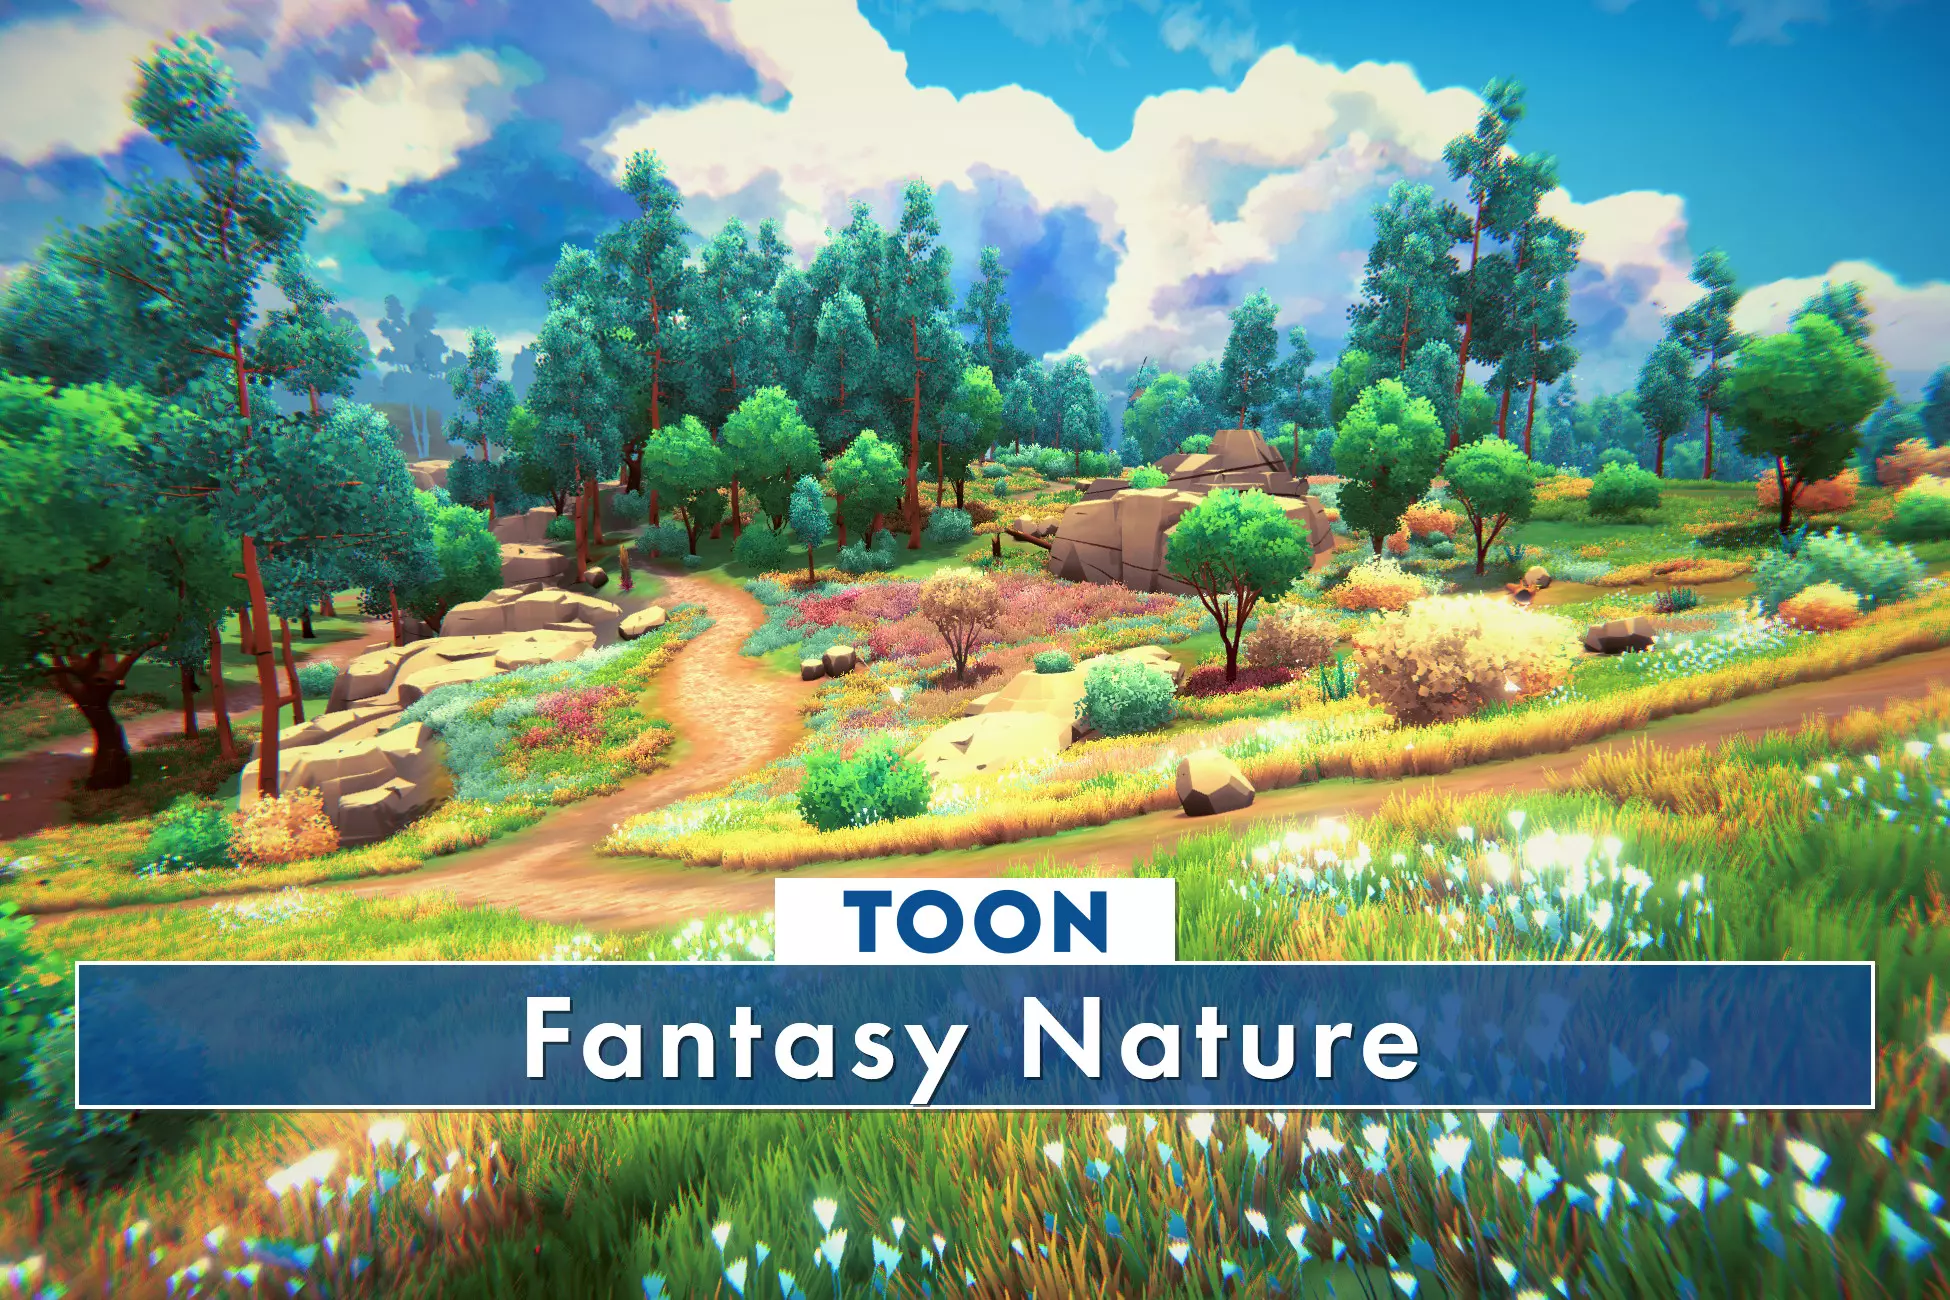 Complete Download of the Toon Fantasy Nature asset pack for unity